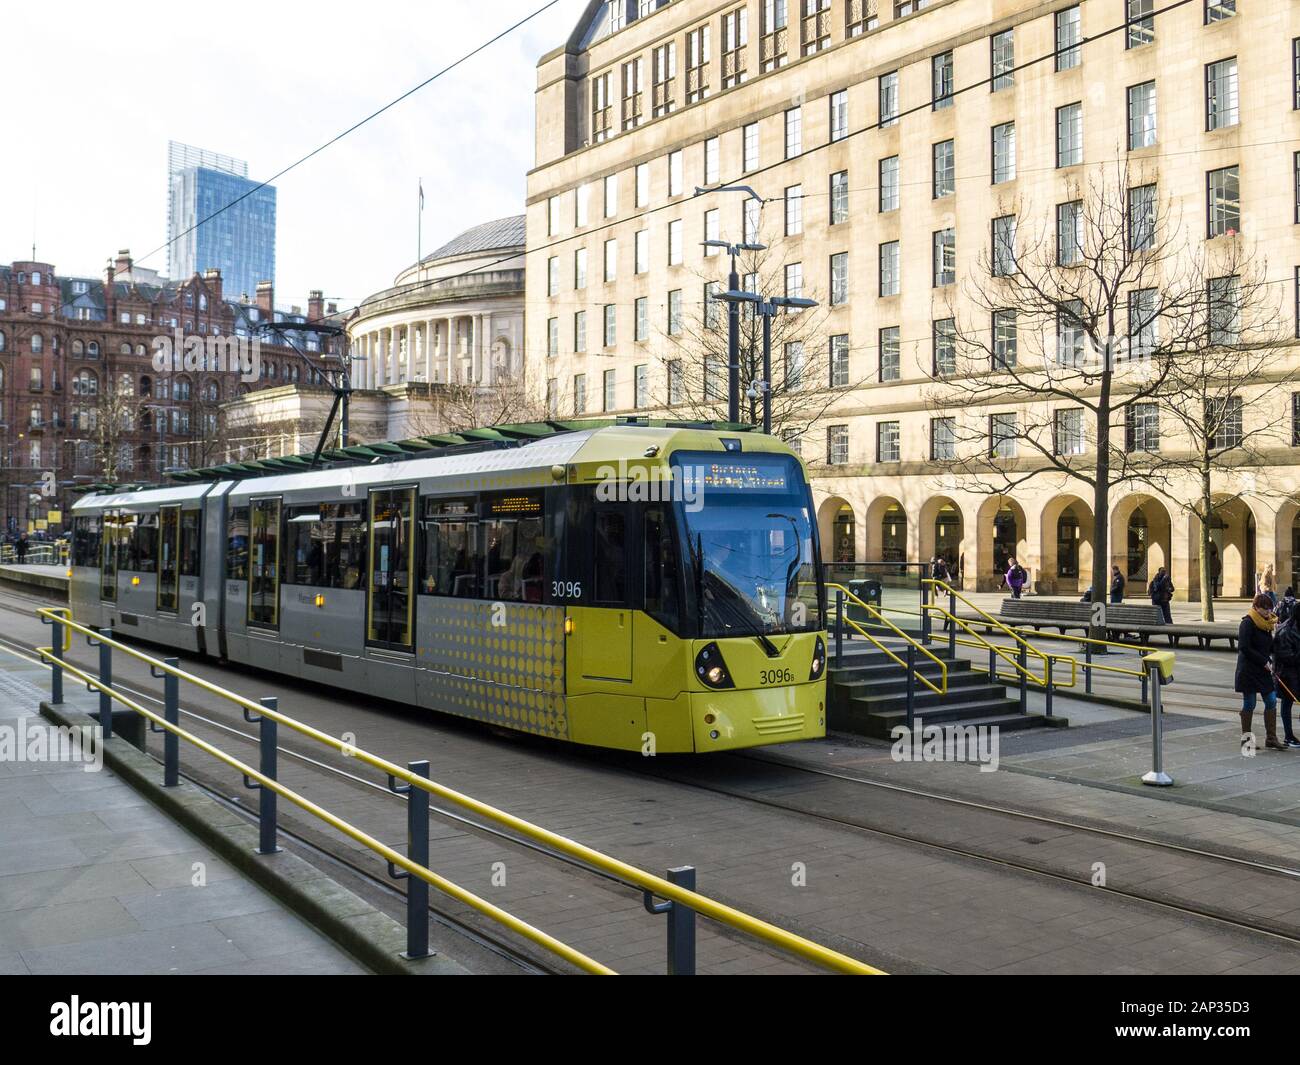 Metrolink tram at St Peter's Square, Manchester Stock Photo